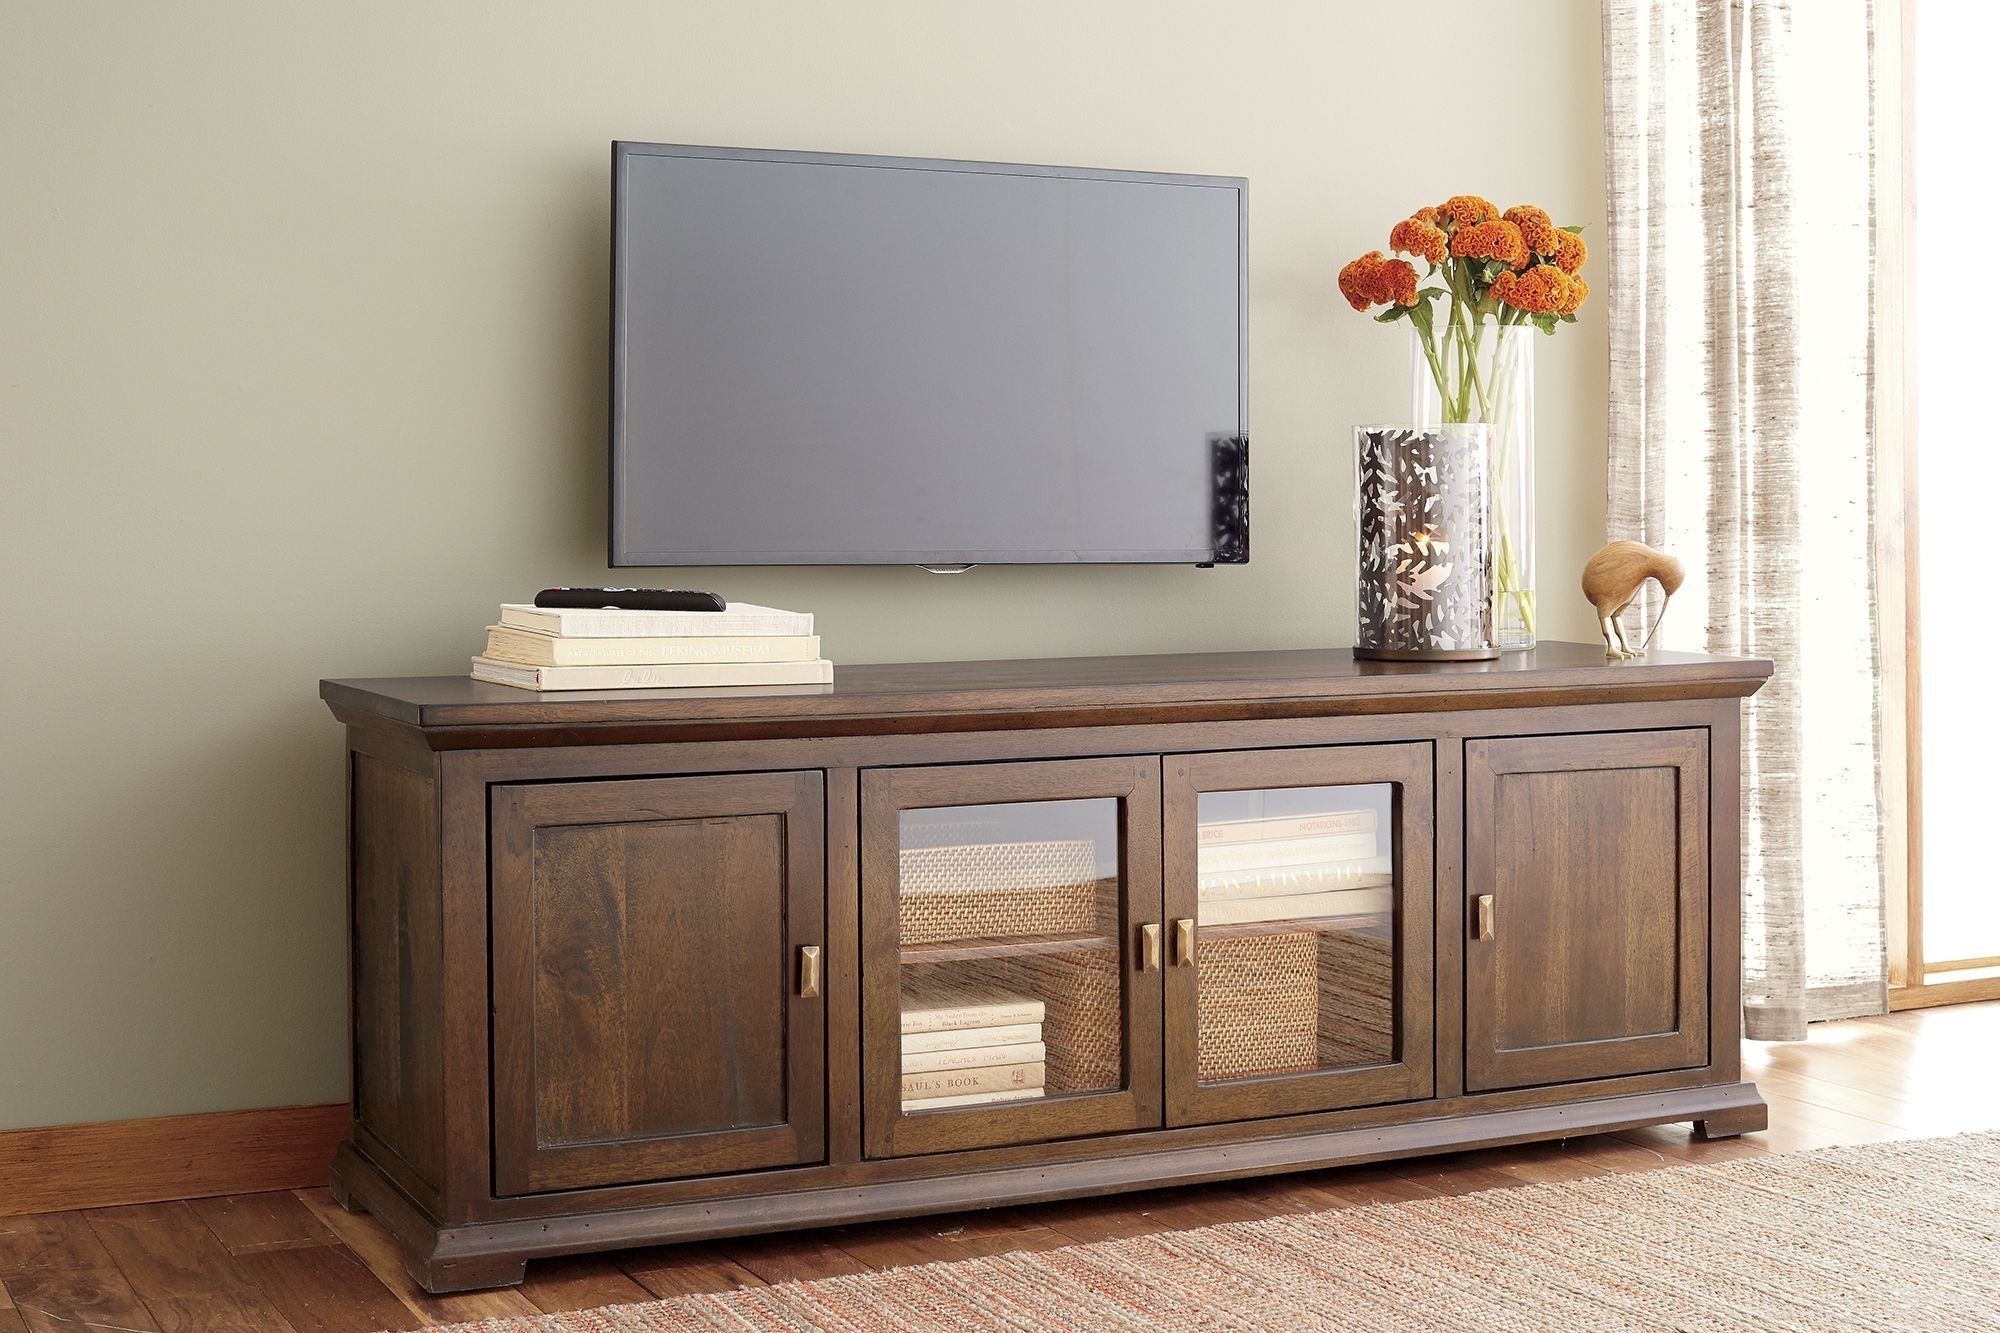 Crowne 72" Media Console | Living Rooms | Pinterest | Traditional Regarding Most Recent Walnut Finish Crown Moulding Sideboards (View 14 of 20)